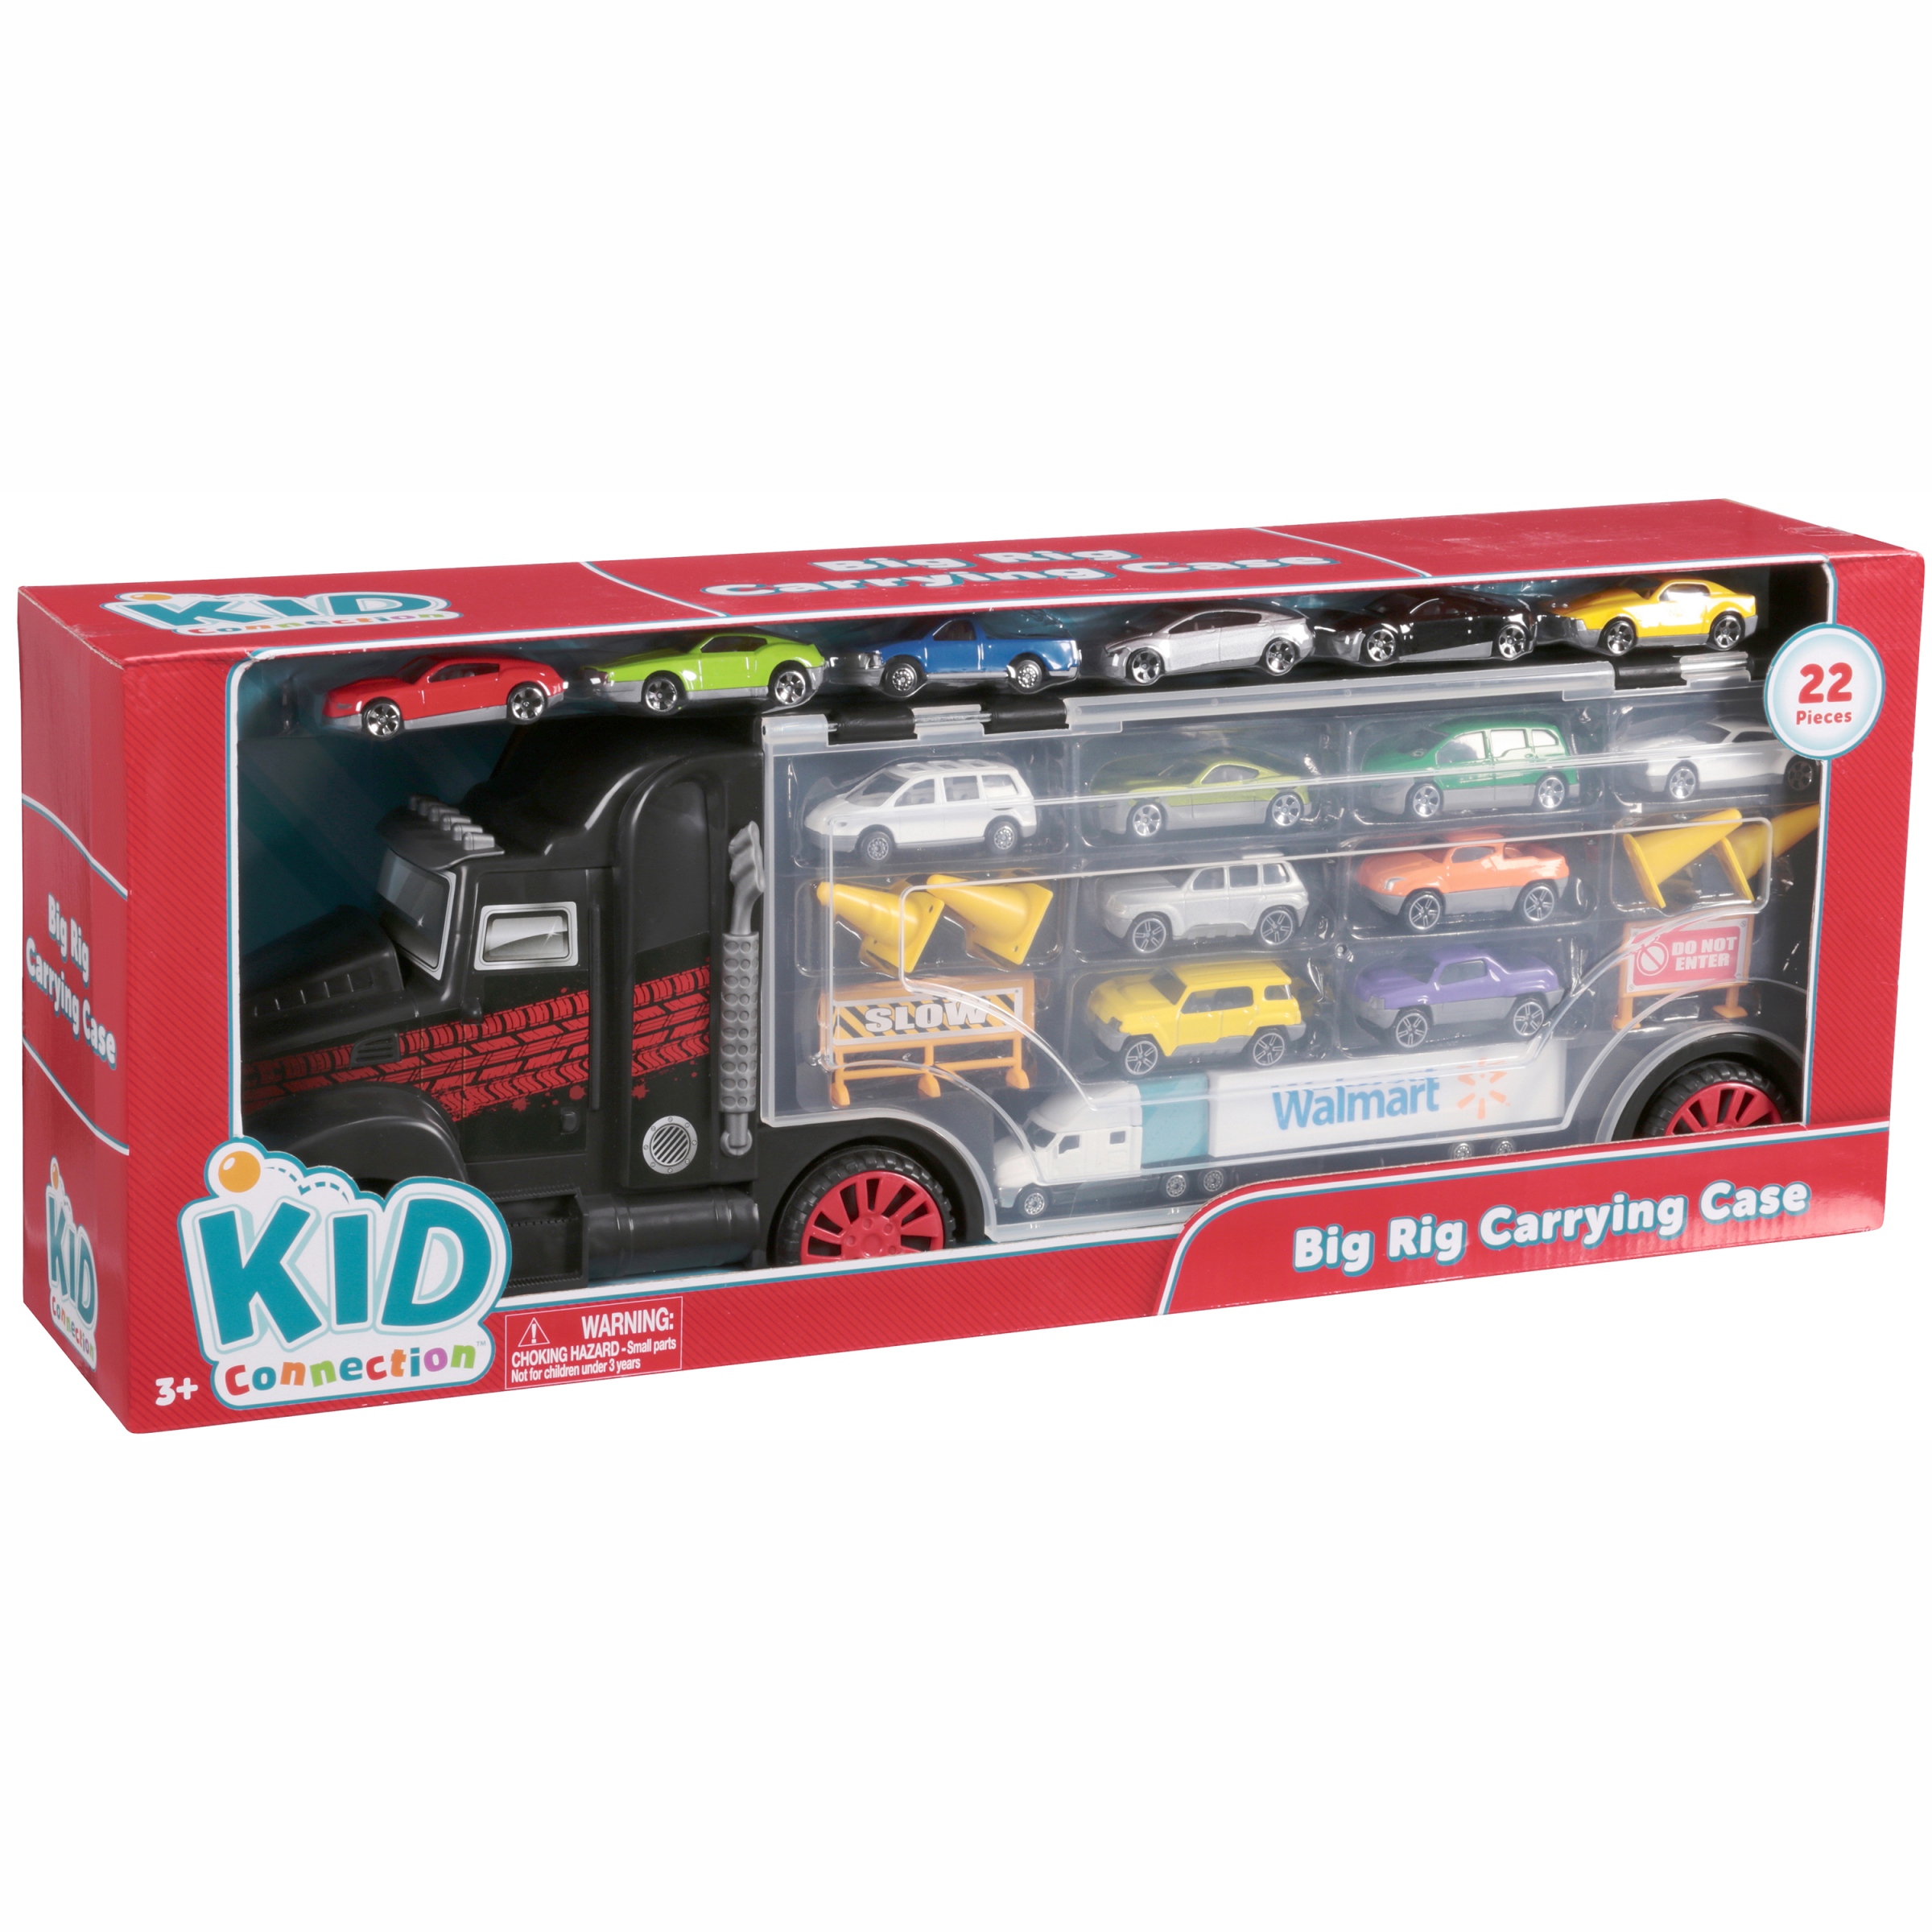 Kid Connection™ Big Rig Carrying Case 22 pc Box - image 2 of 4